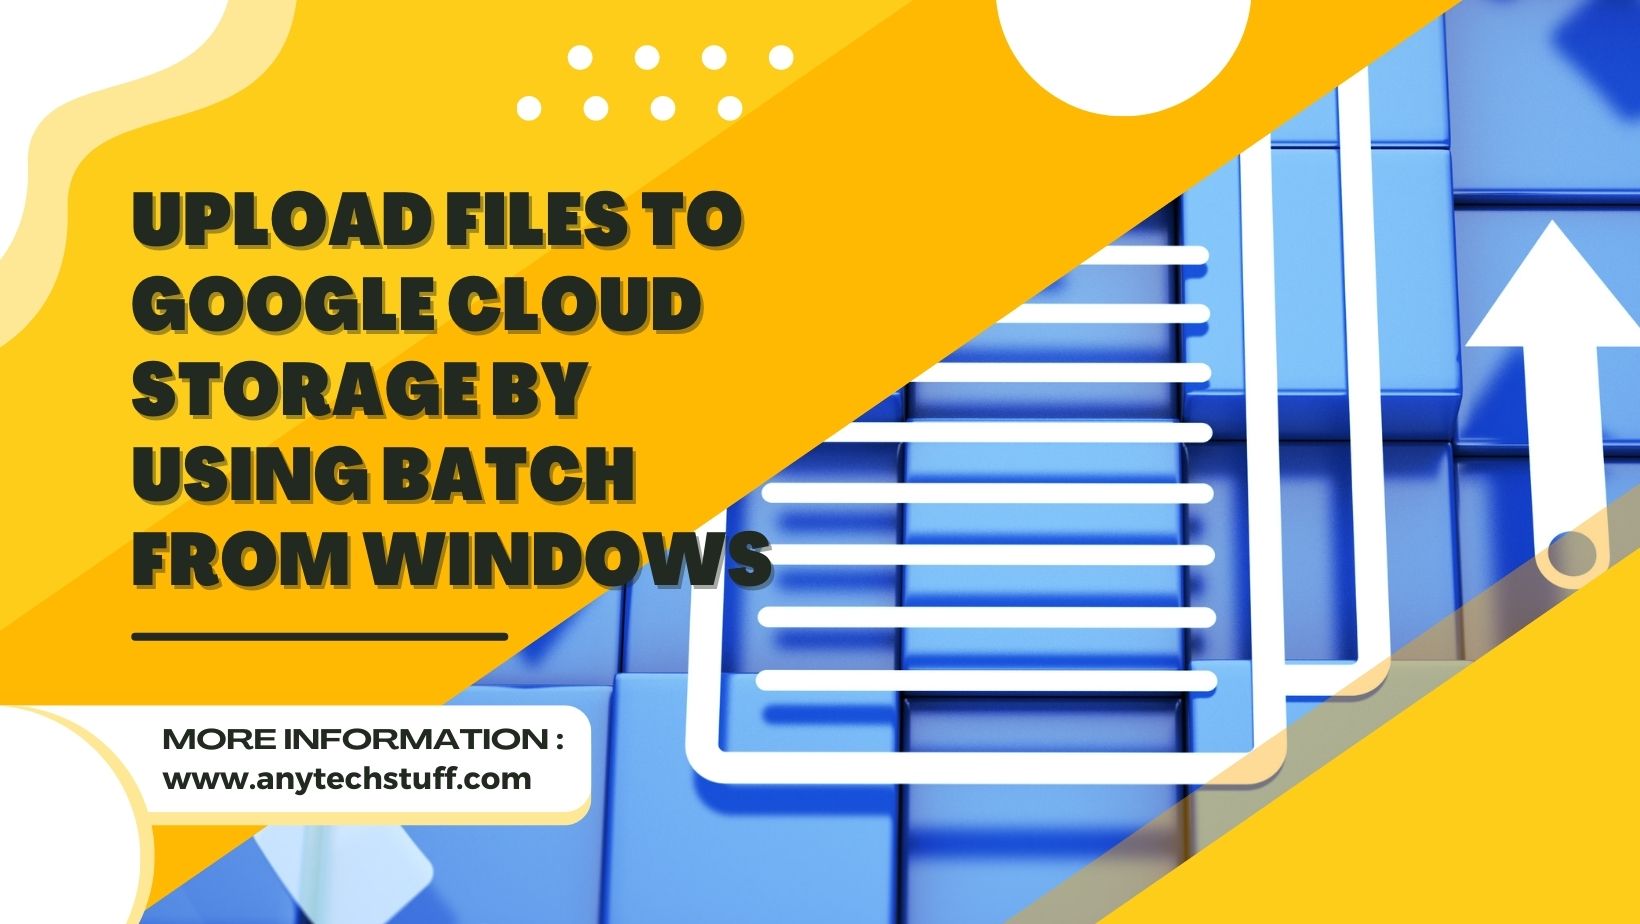 Upload Files To Google Cloud Storage By Using Batch From Your Windows Machine